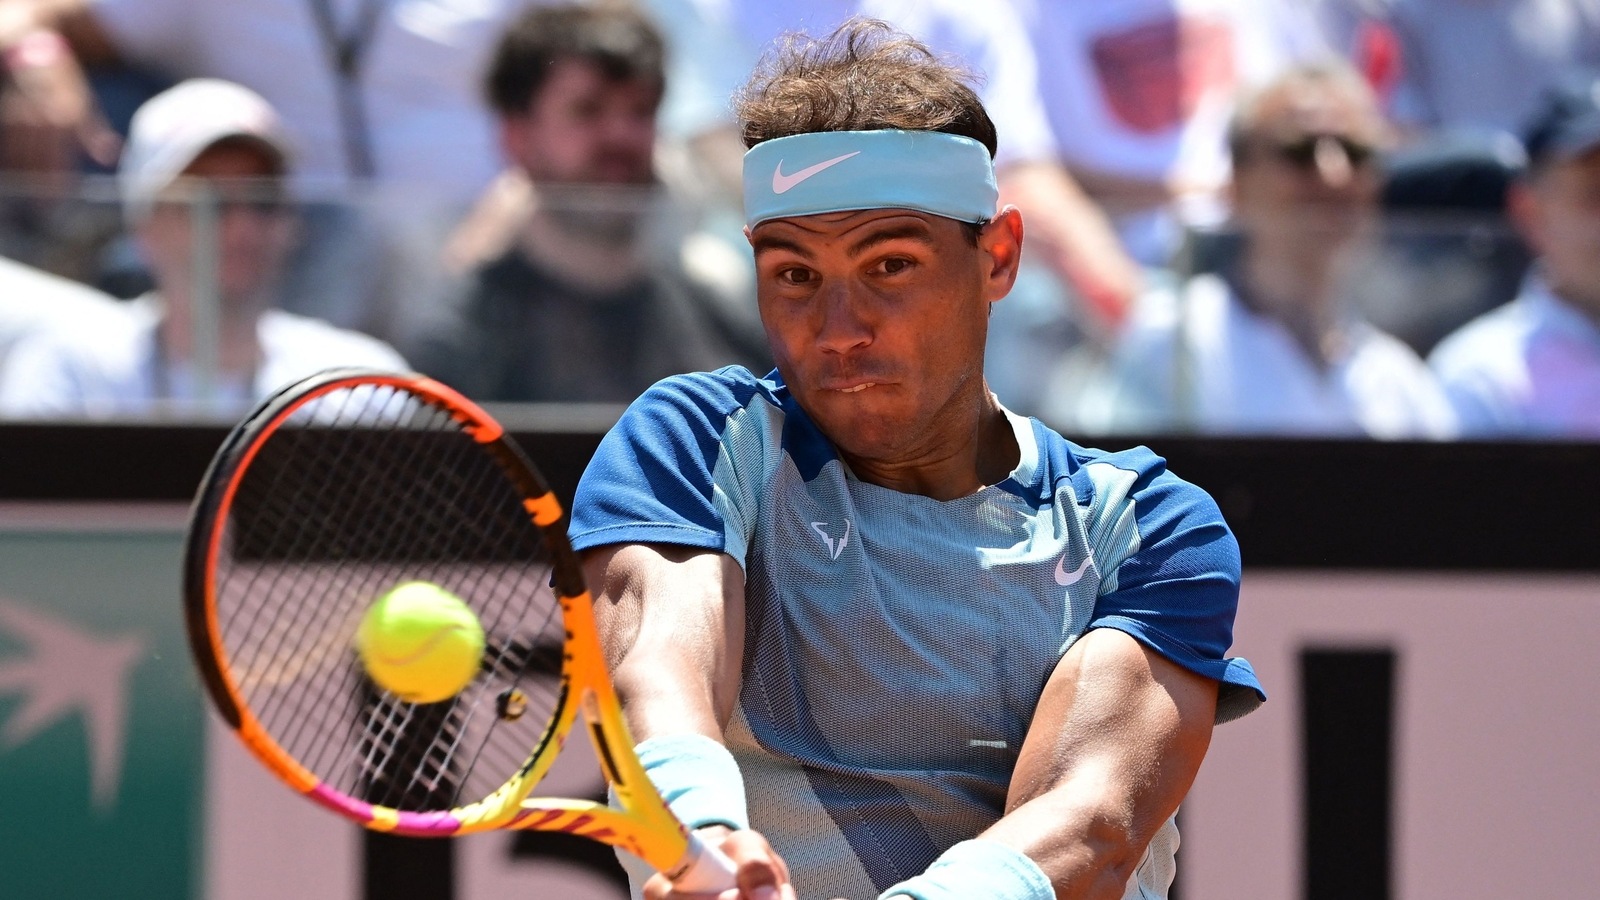 Nadal bounces back from loss to Alcaraz, beats Isner in Rome